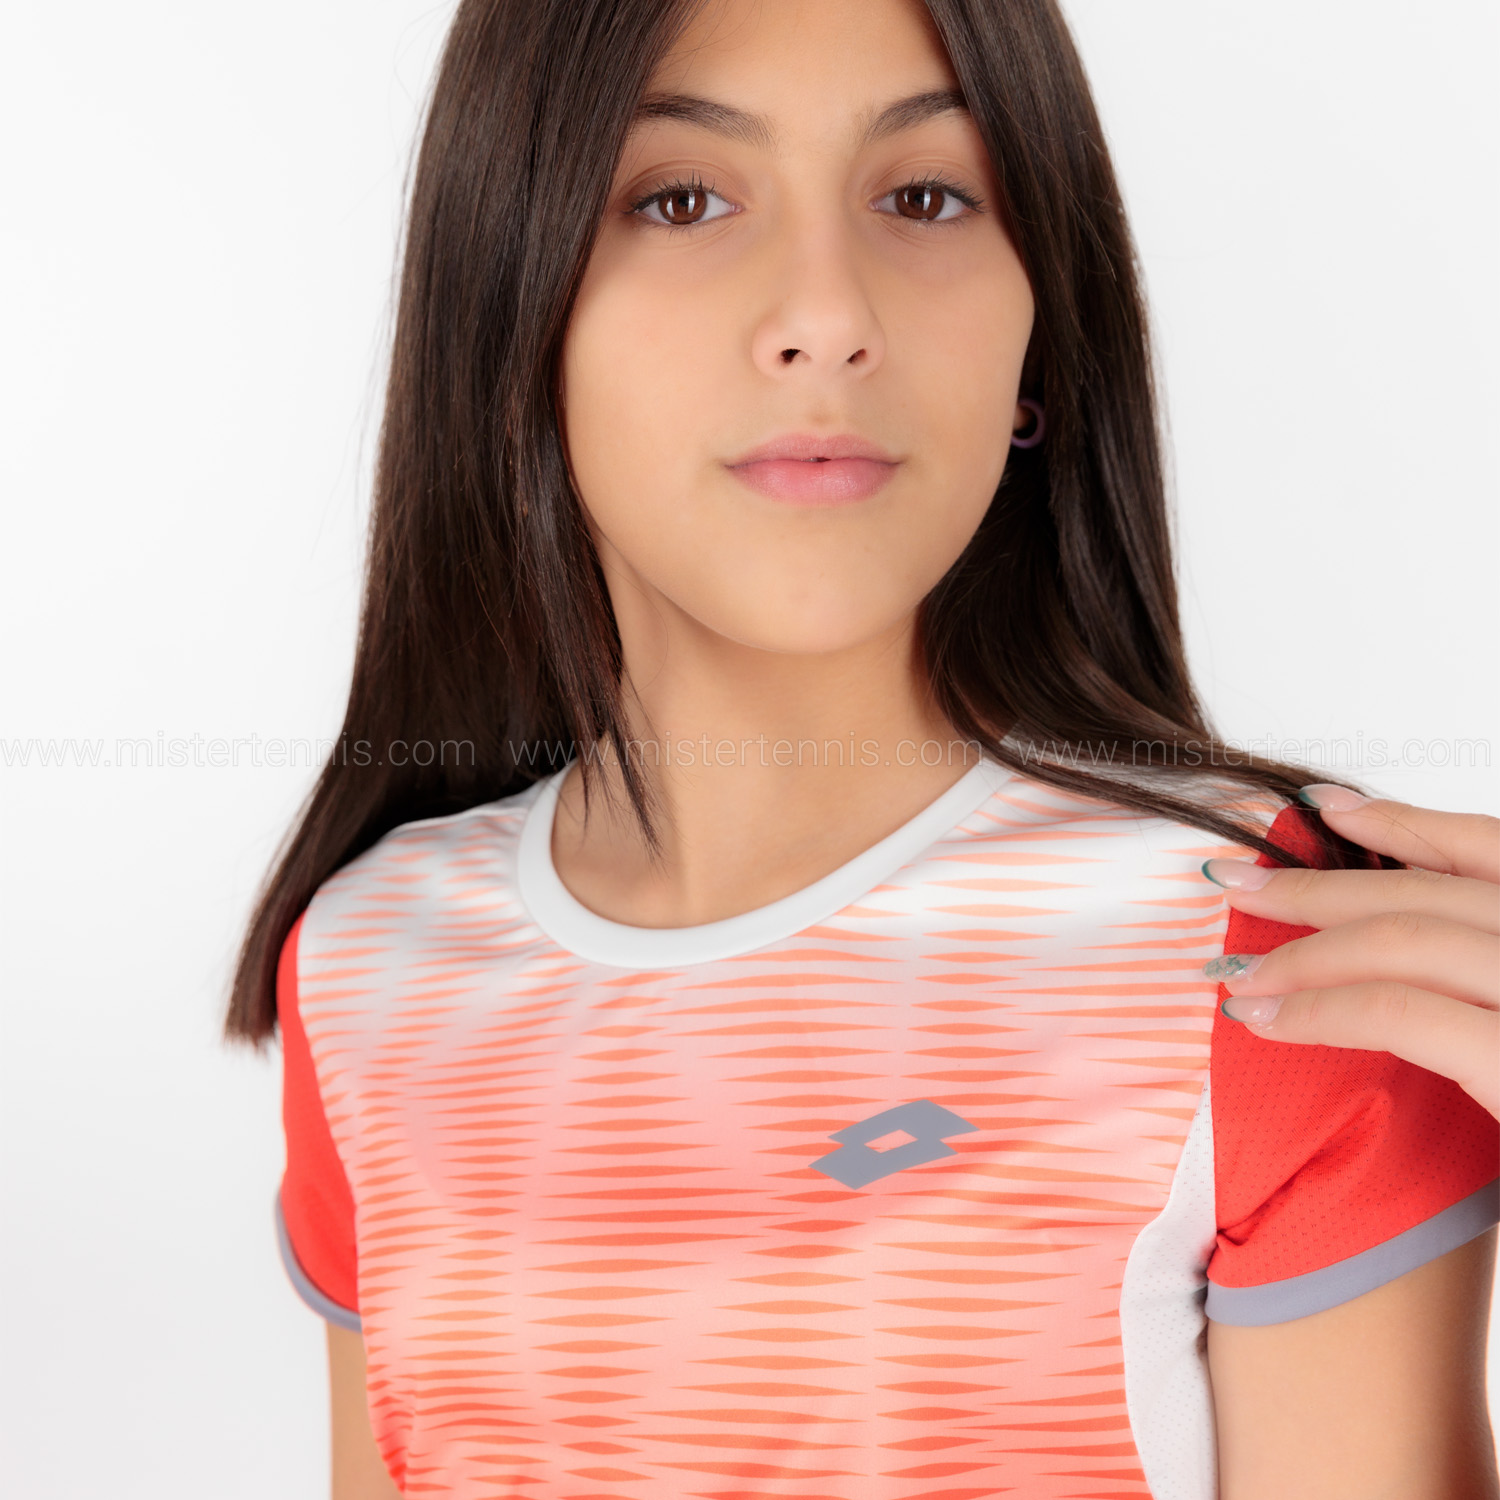 Lotto Top IV 2 T-Shirt Girl - Red Poppy/Bright White